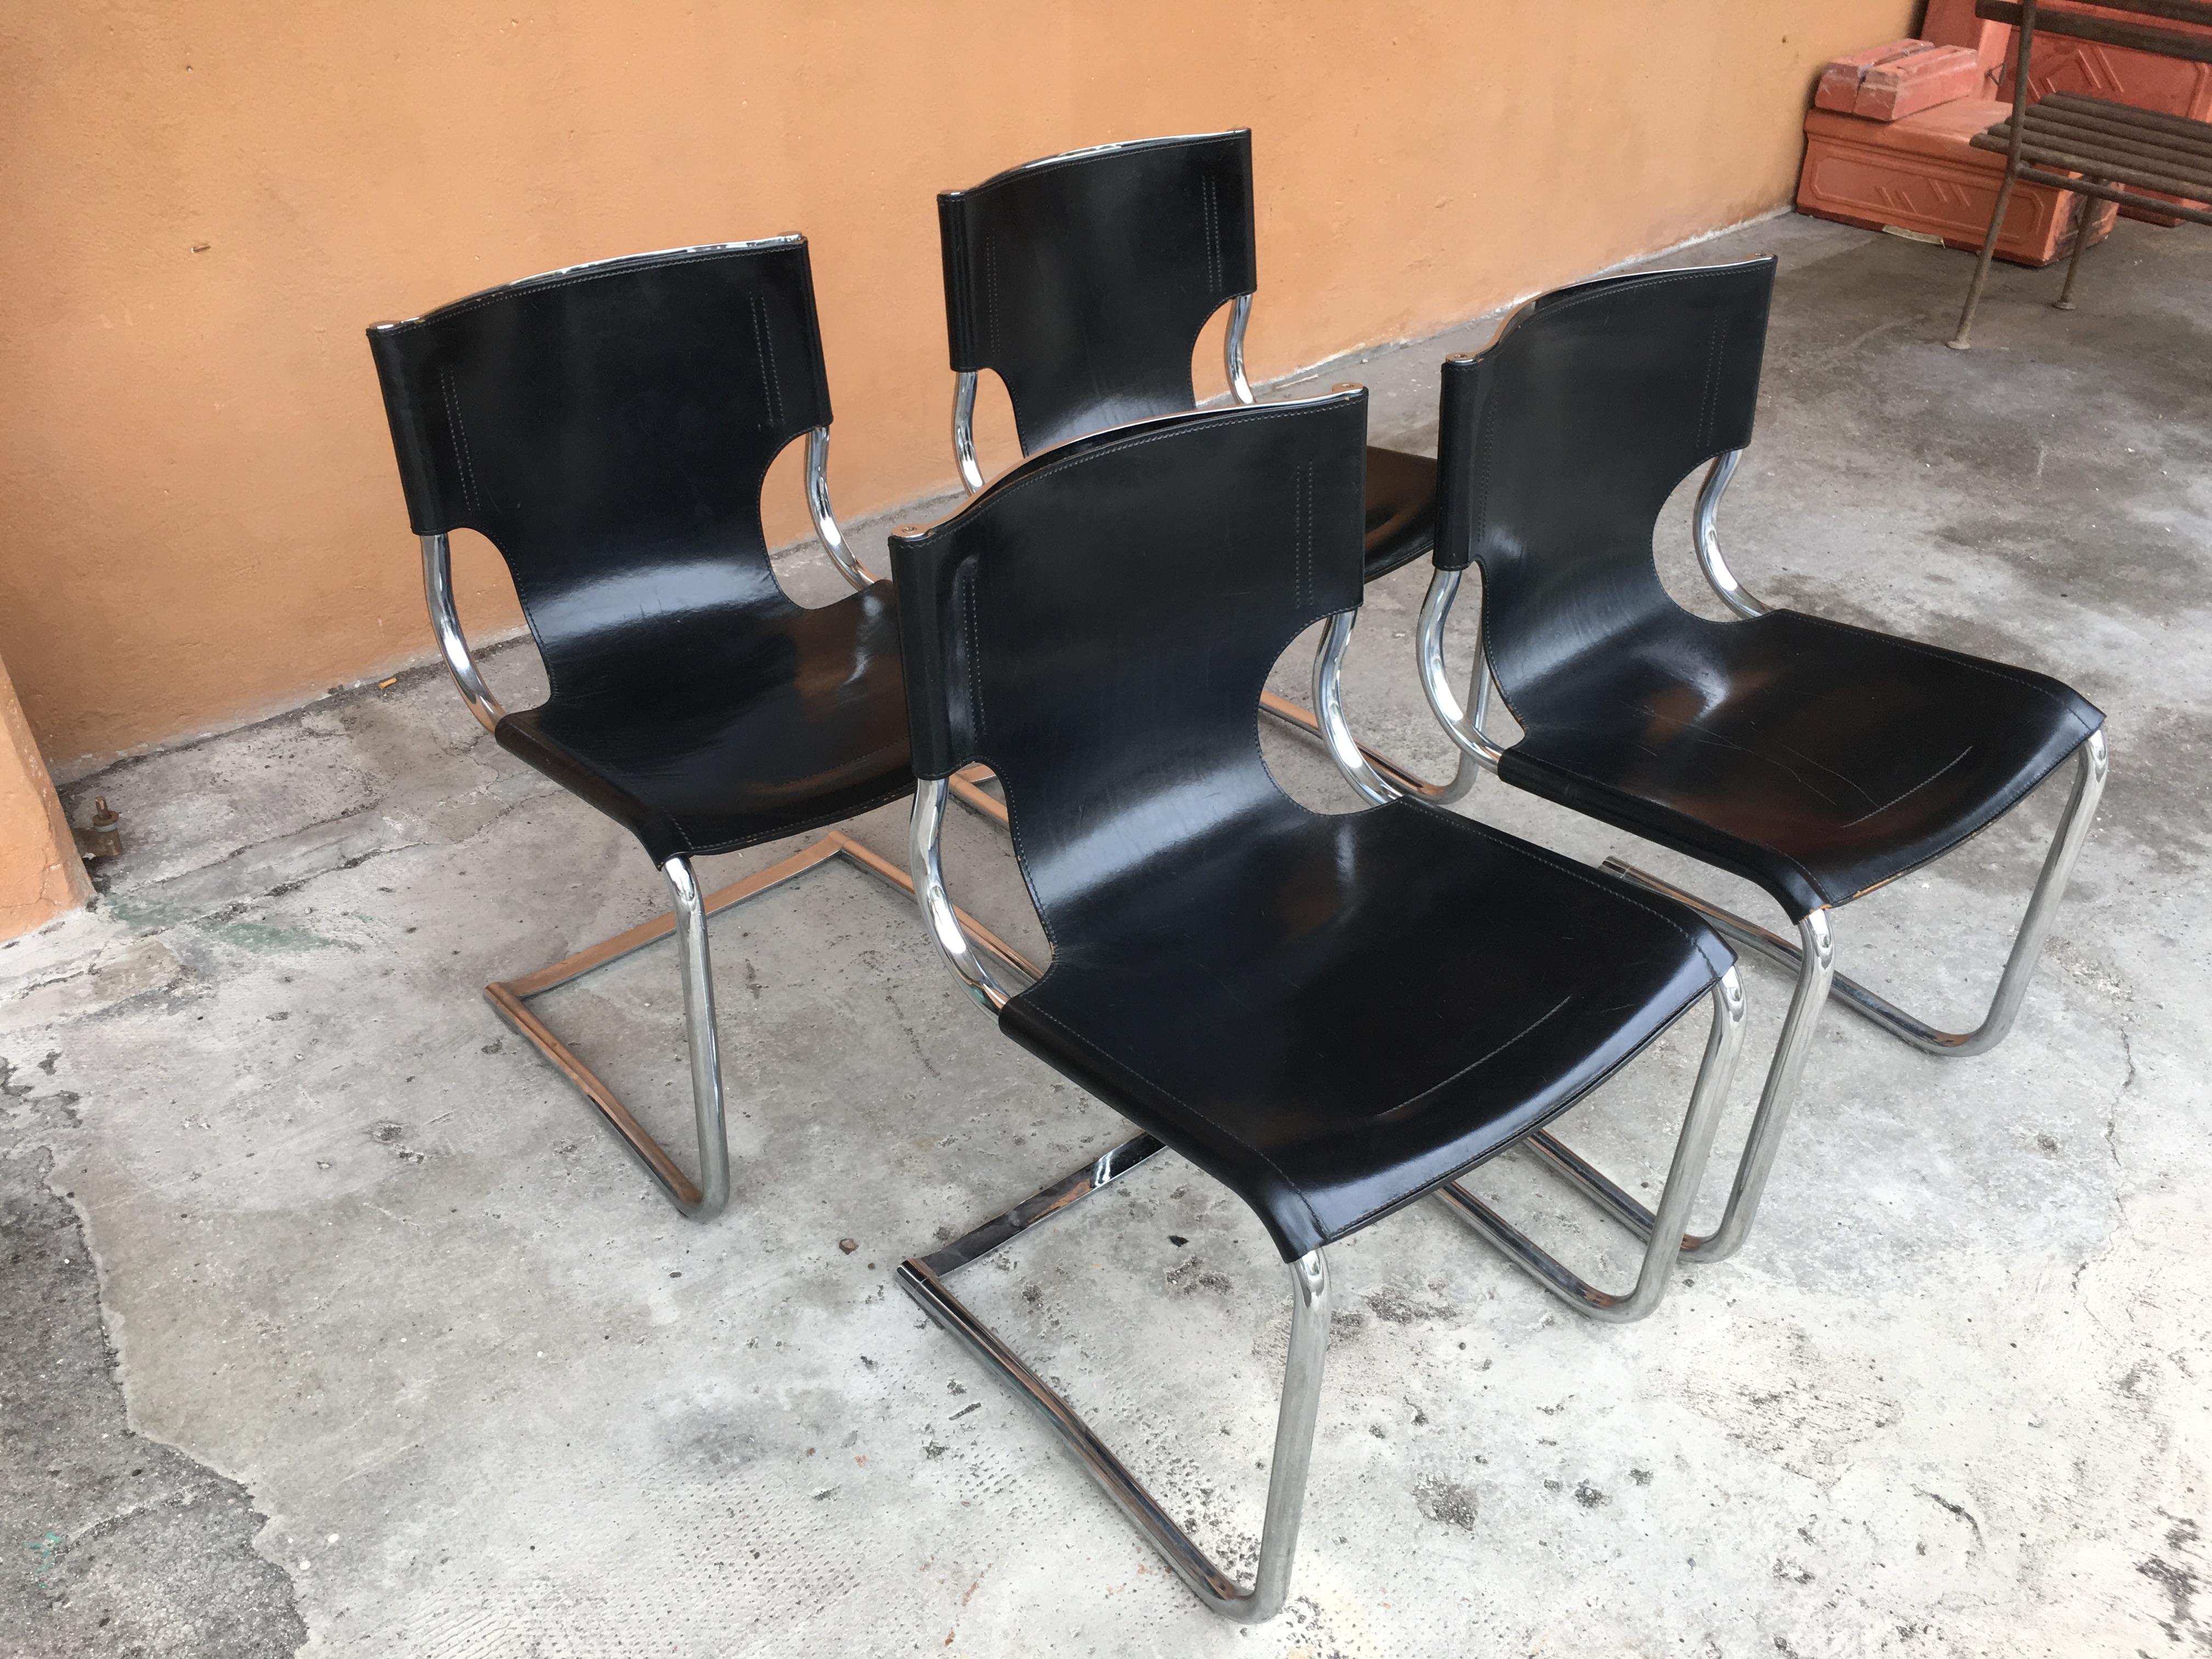 Late 20th Century Mid-Century Modern Italian Set of 4 Chrome and Leather Chairs